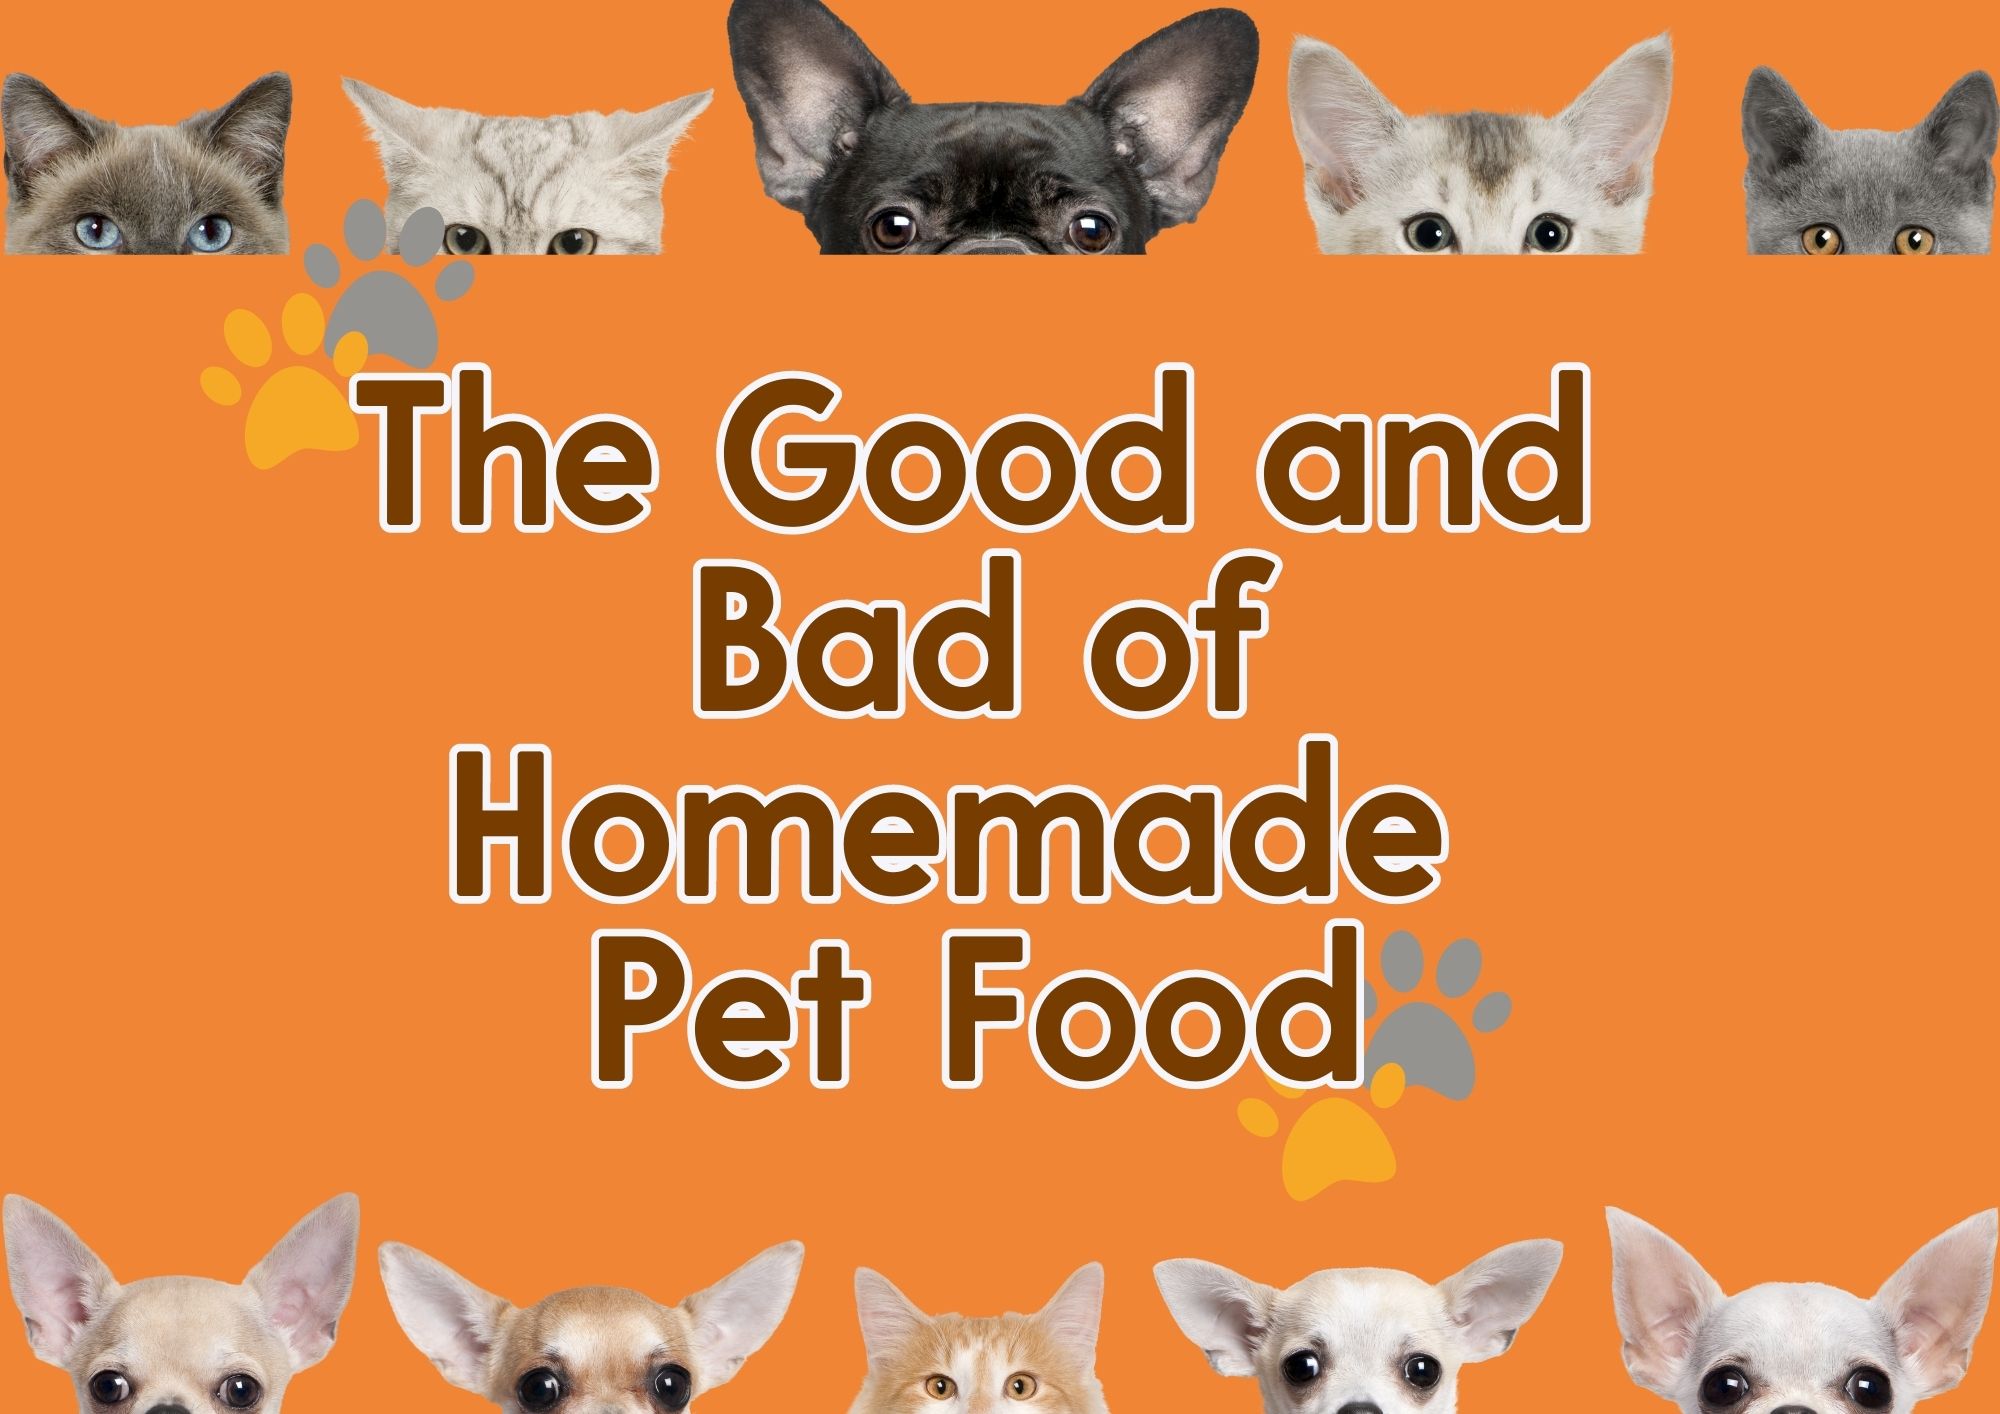 The Good and Bad of Homemade Pet Food